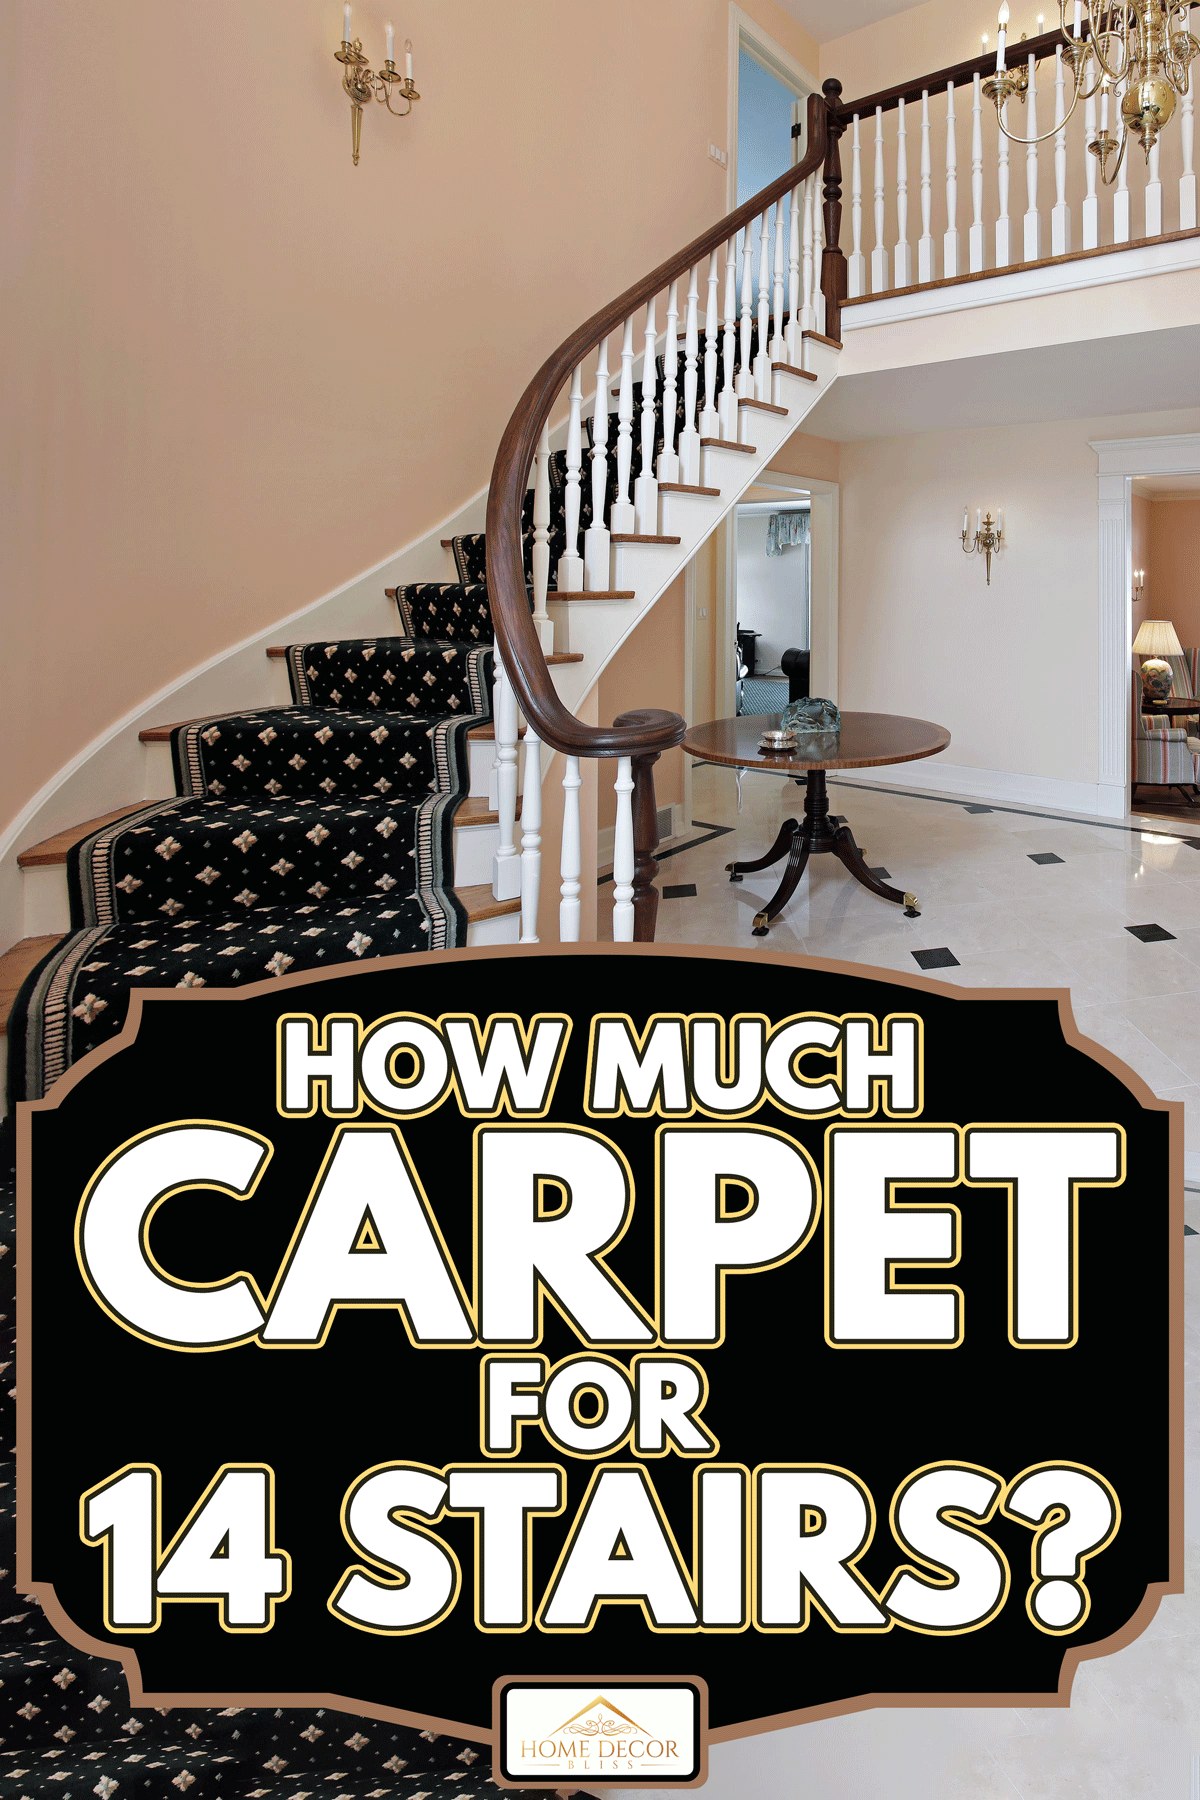 Salmon colored foyer with curved staircase and carpeted stairs, How Much Carpet for 14 Stairs?